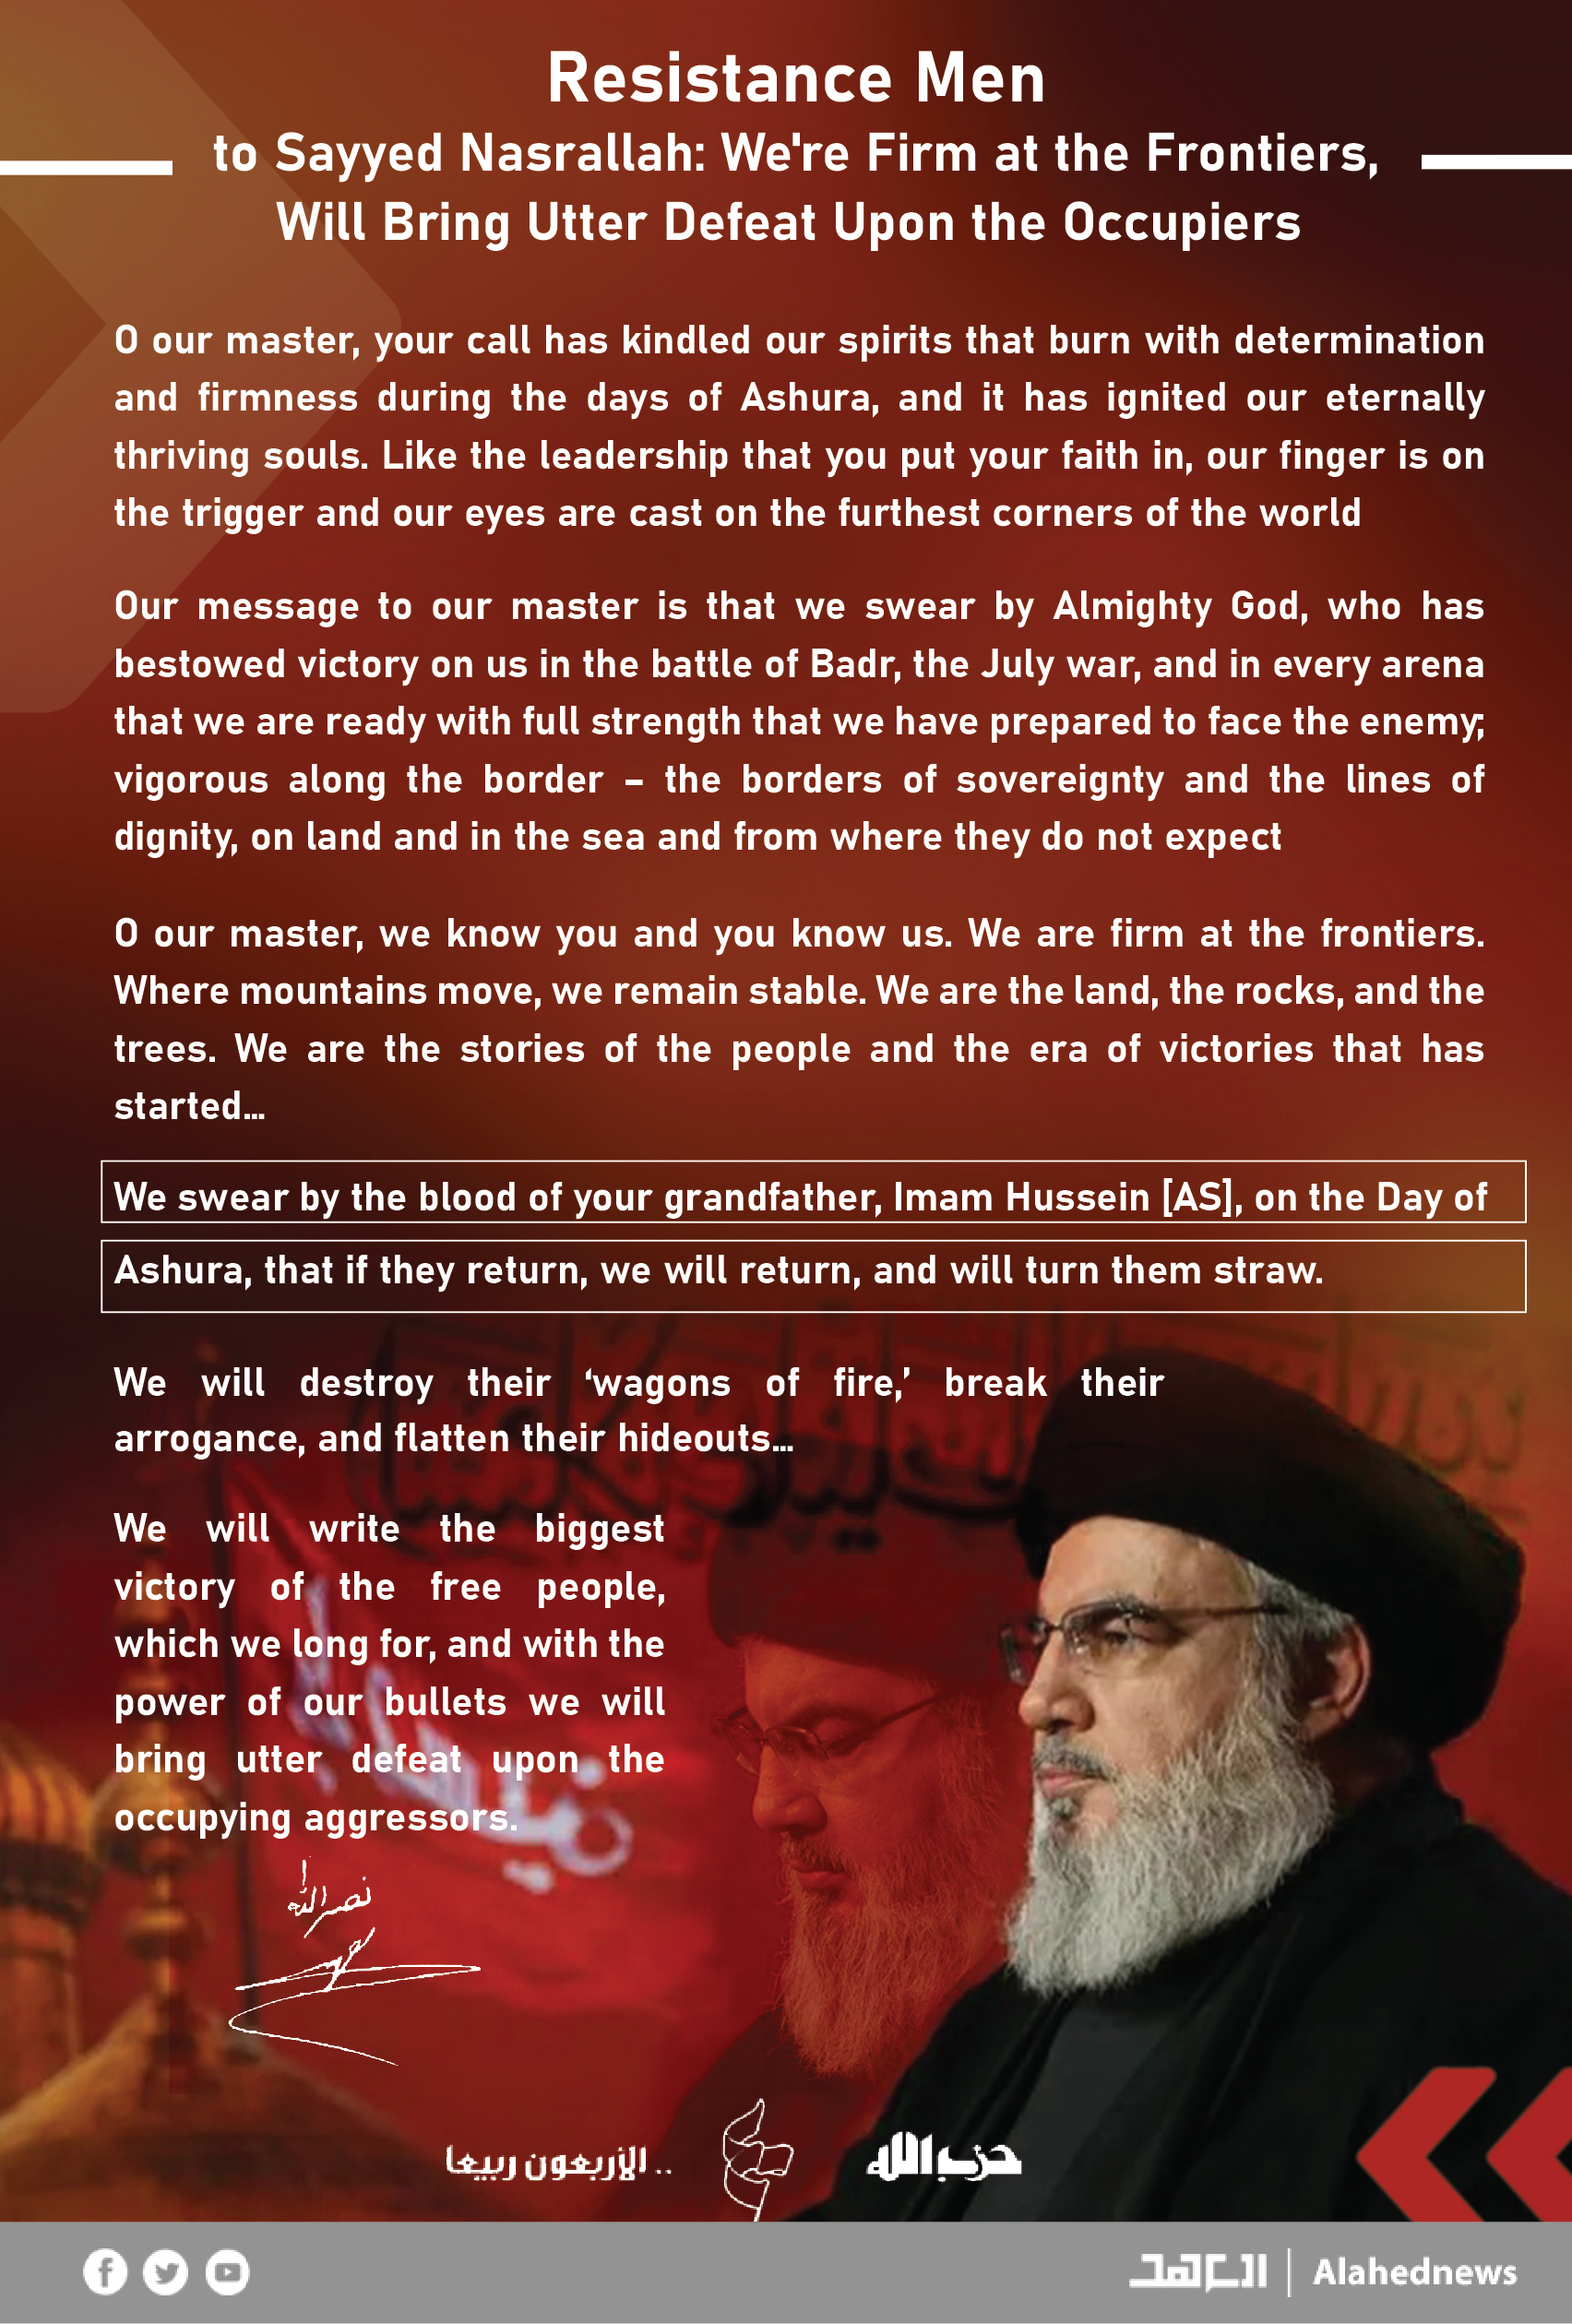 The Letter of the Islamic Resistance Mujahideen to Sayyed Nasrallah